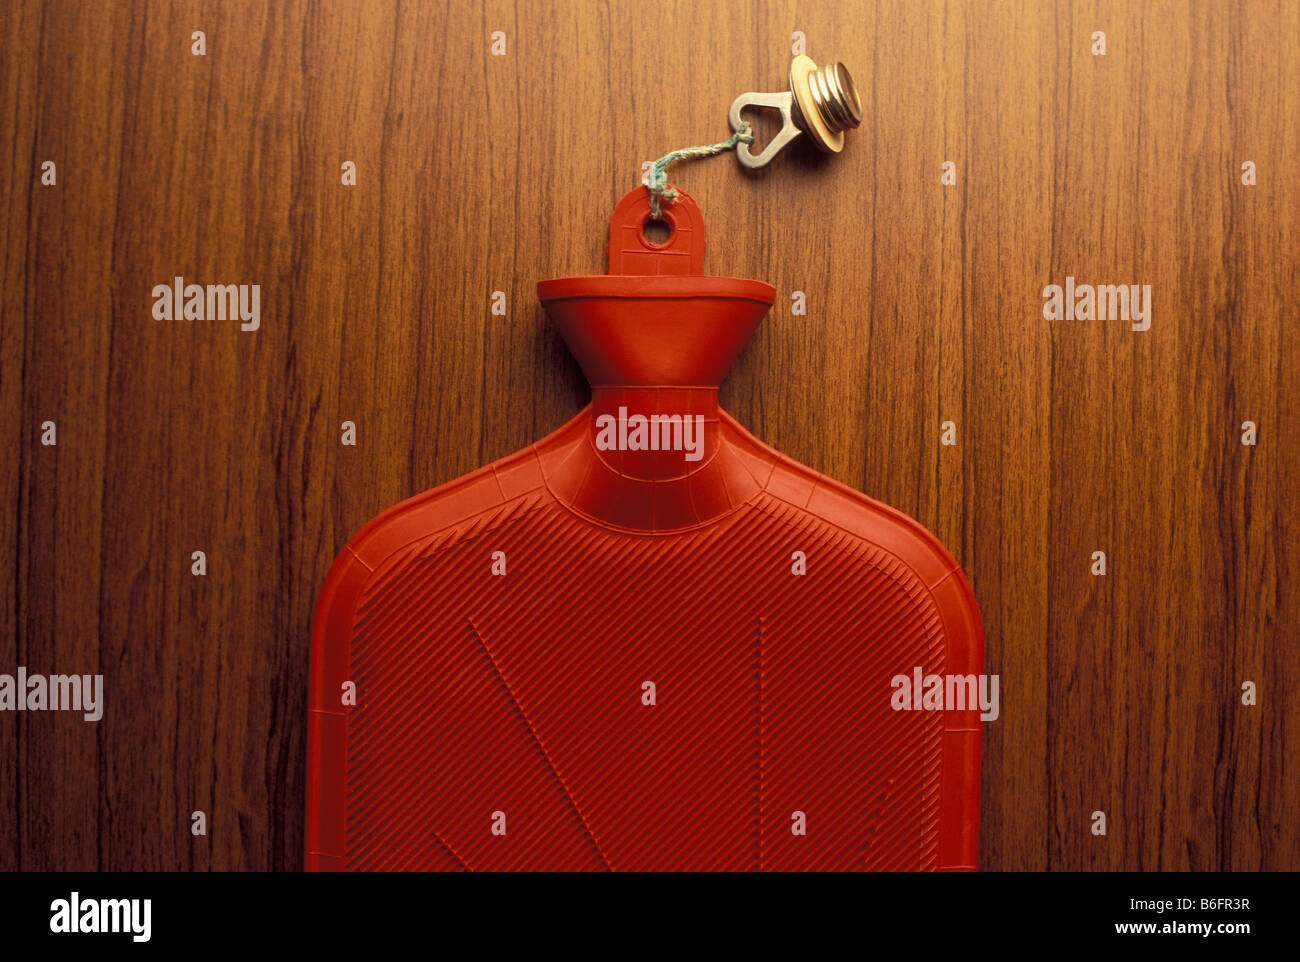 Red hot water bottle Stock Photo